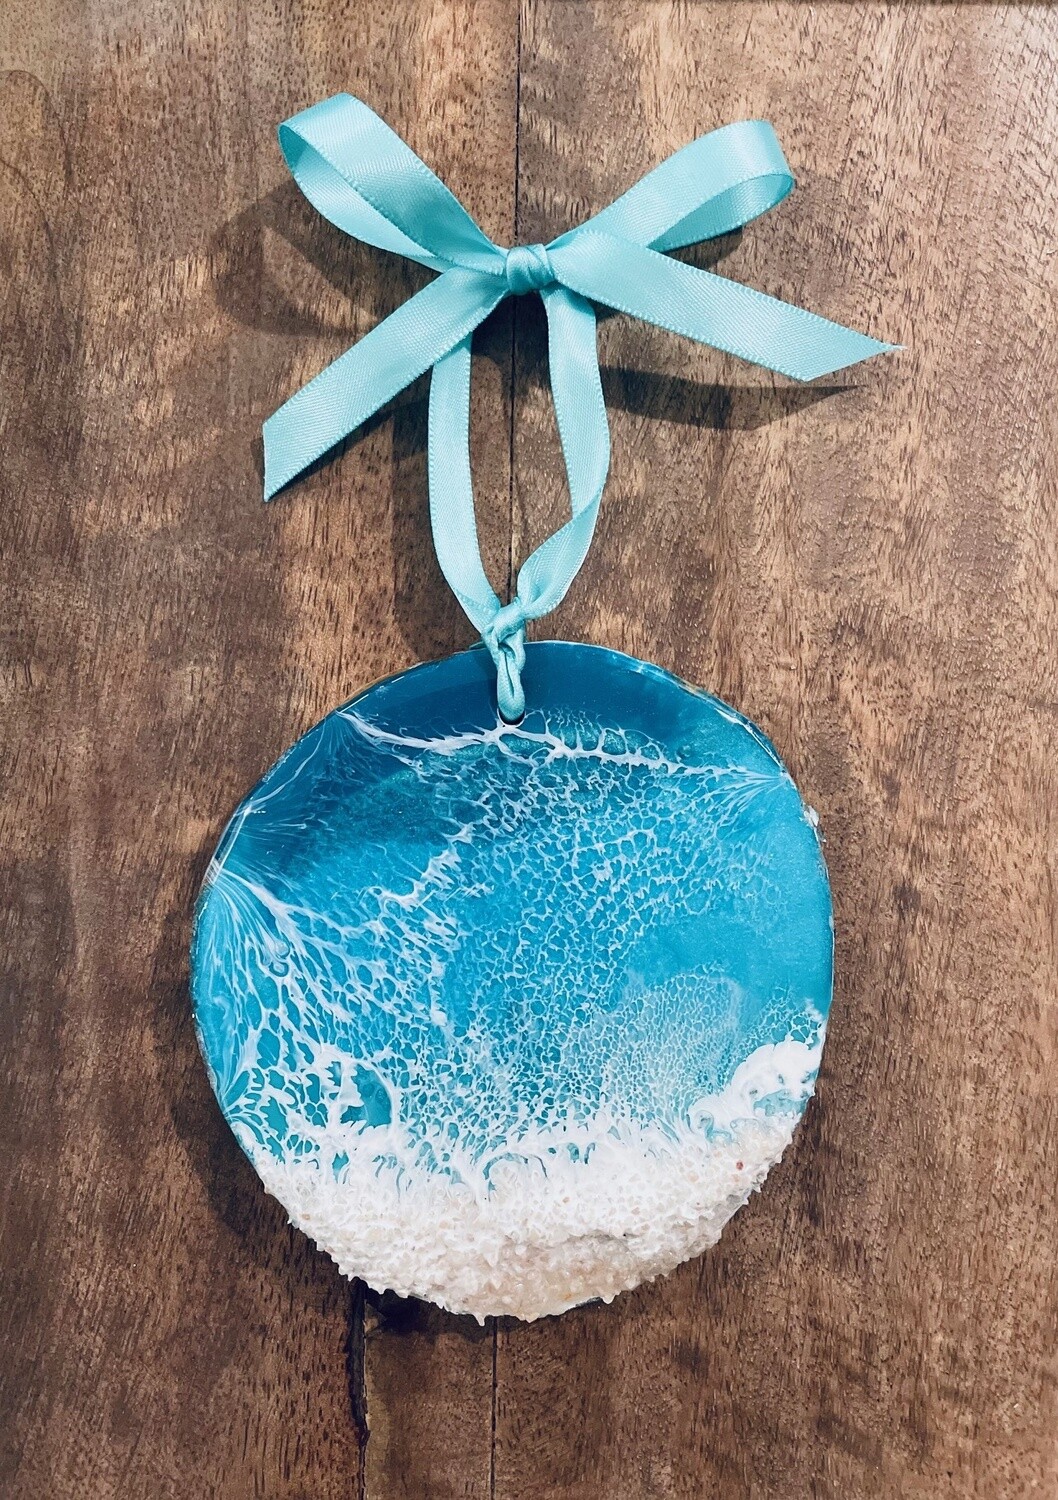 Resin Ornament Round Wood with Teal & Sand